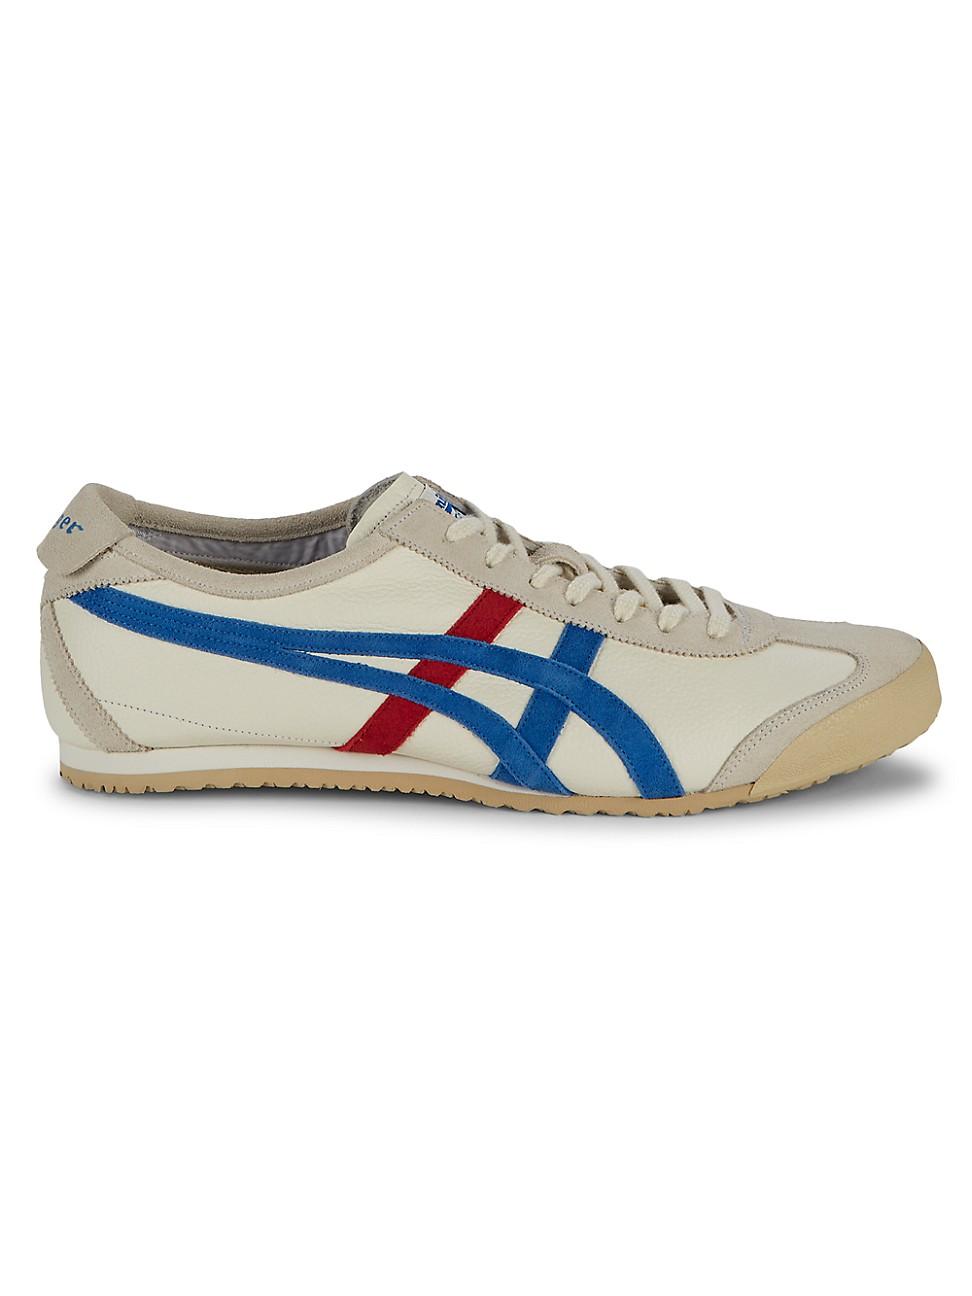 Onitsuka Tiger Leather Mexico 66 Sneakers in Blue for Men - Lyst